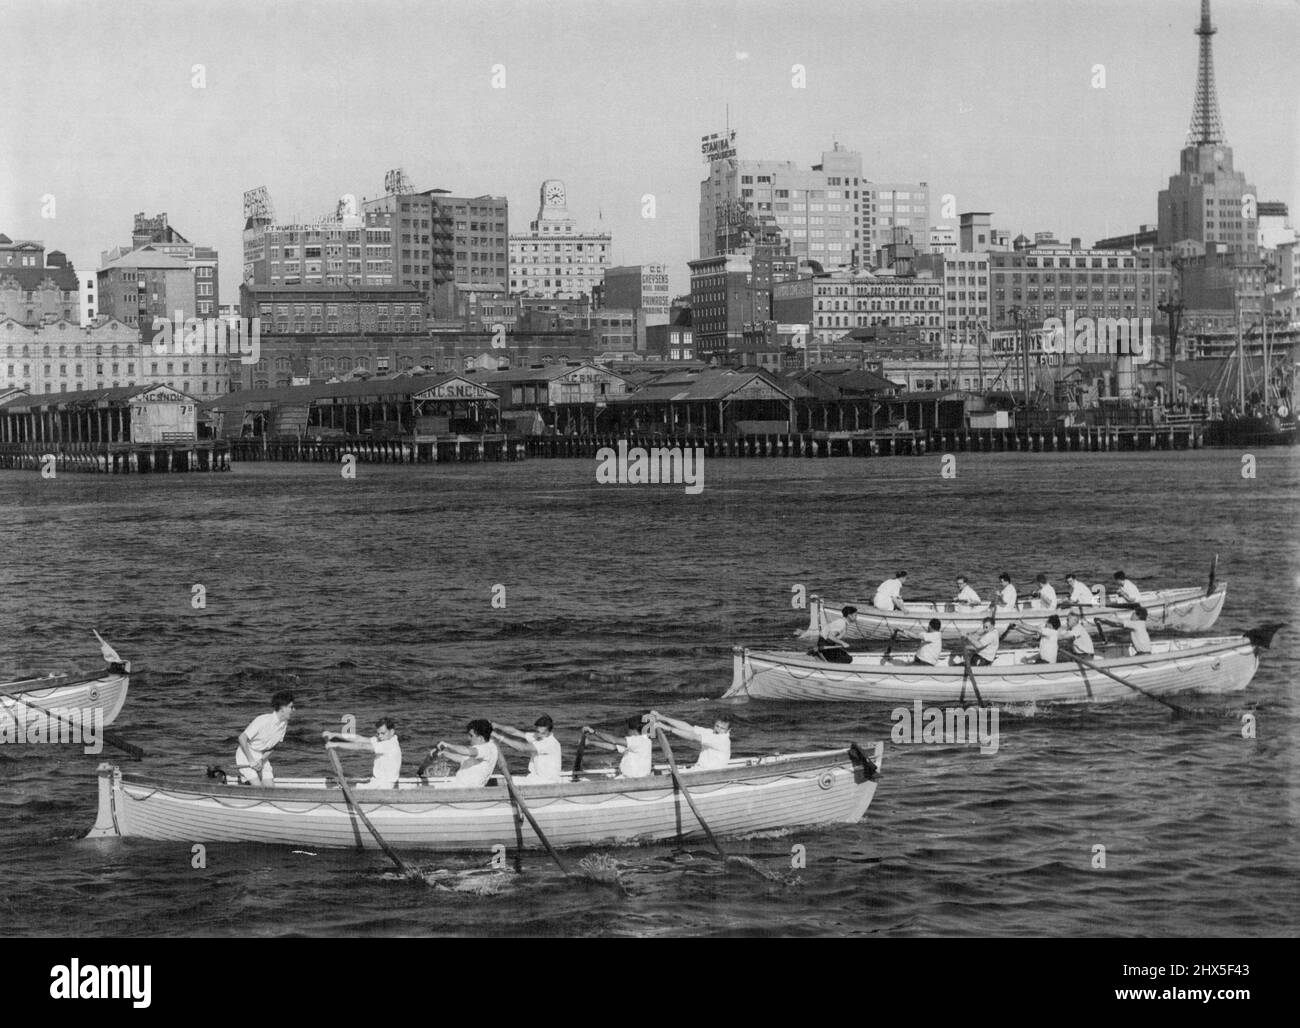 The annual race in Whales for the Orsova Cup was towed at Pyrmont yest. The race was contested by crews from all departments from the R.M.S. Orsova ***** won by the Pontoon pilots identified ratings. October 17, 1955. (Photo by Martin/Fairfax Media). Stock Photo